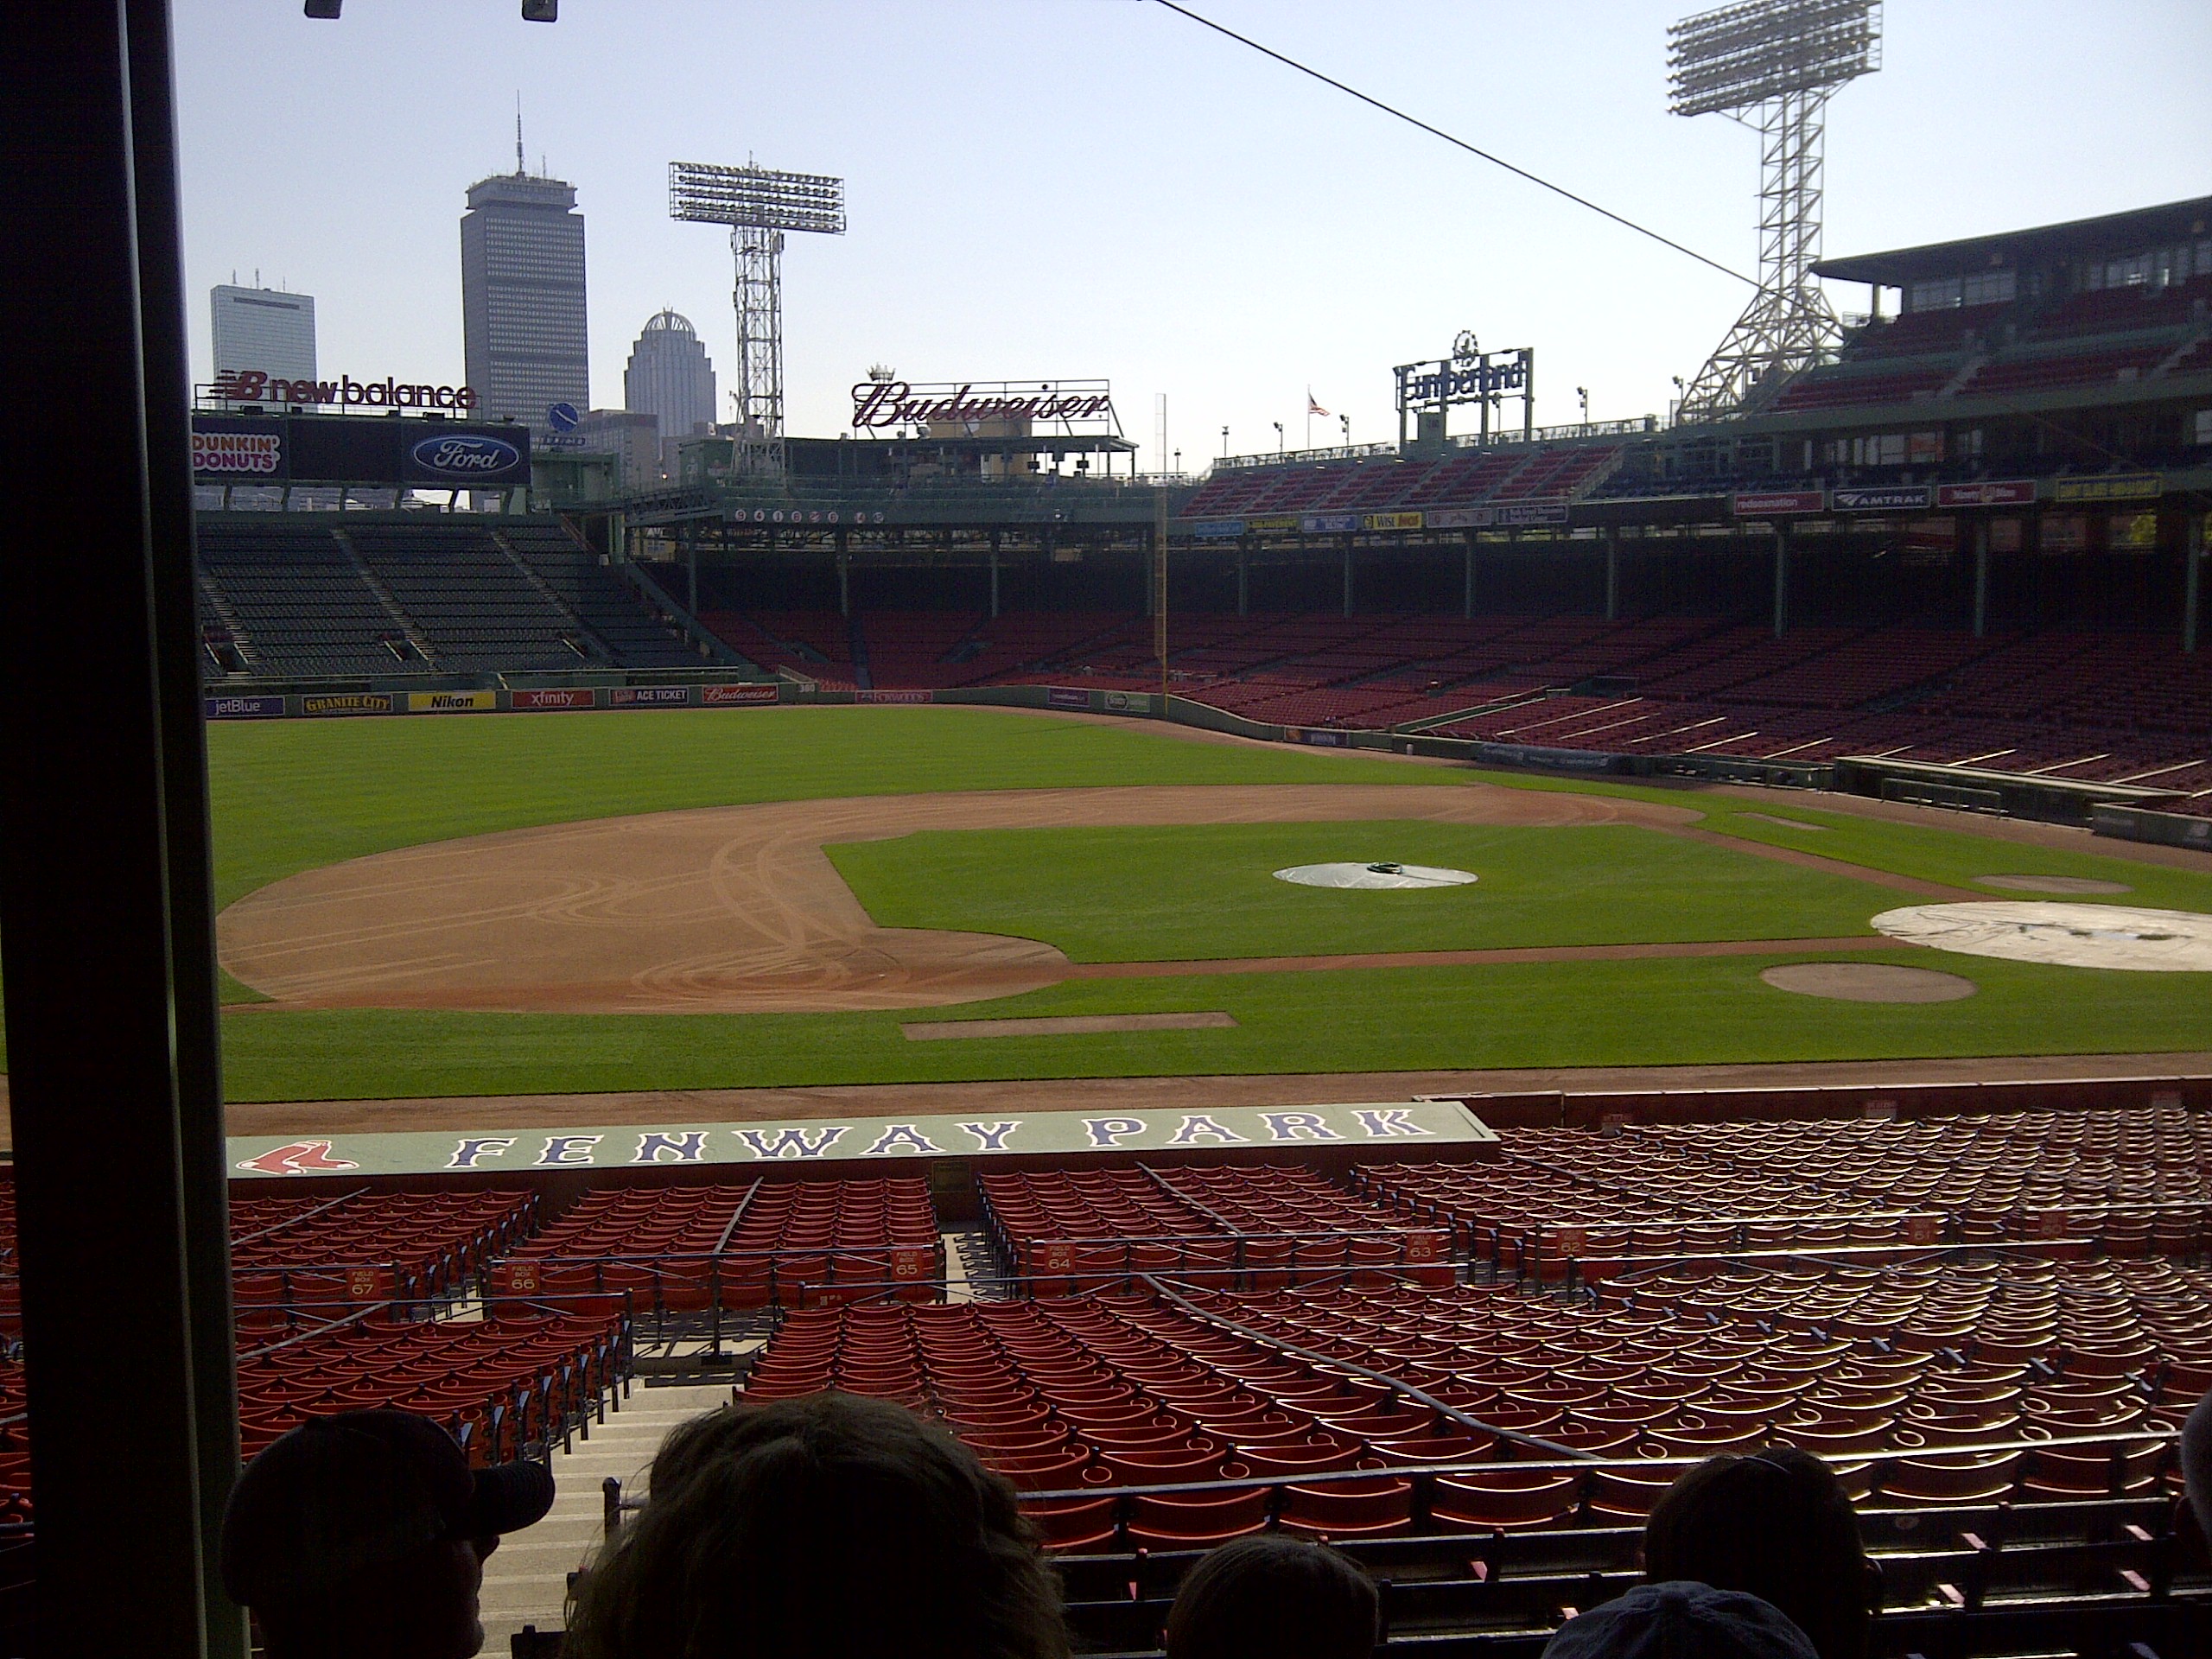 Fenway Park – Home of the Boston Red Sox